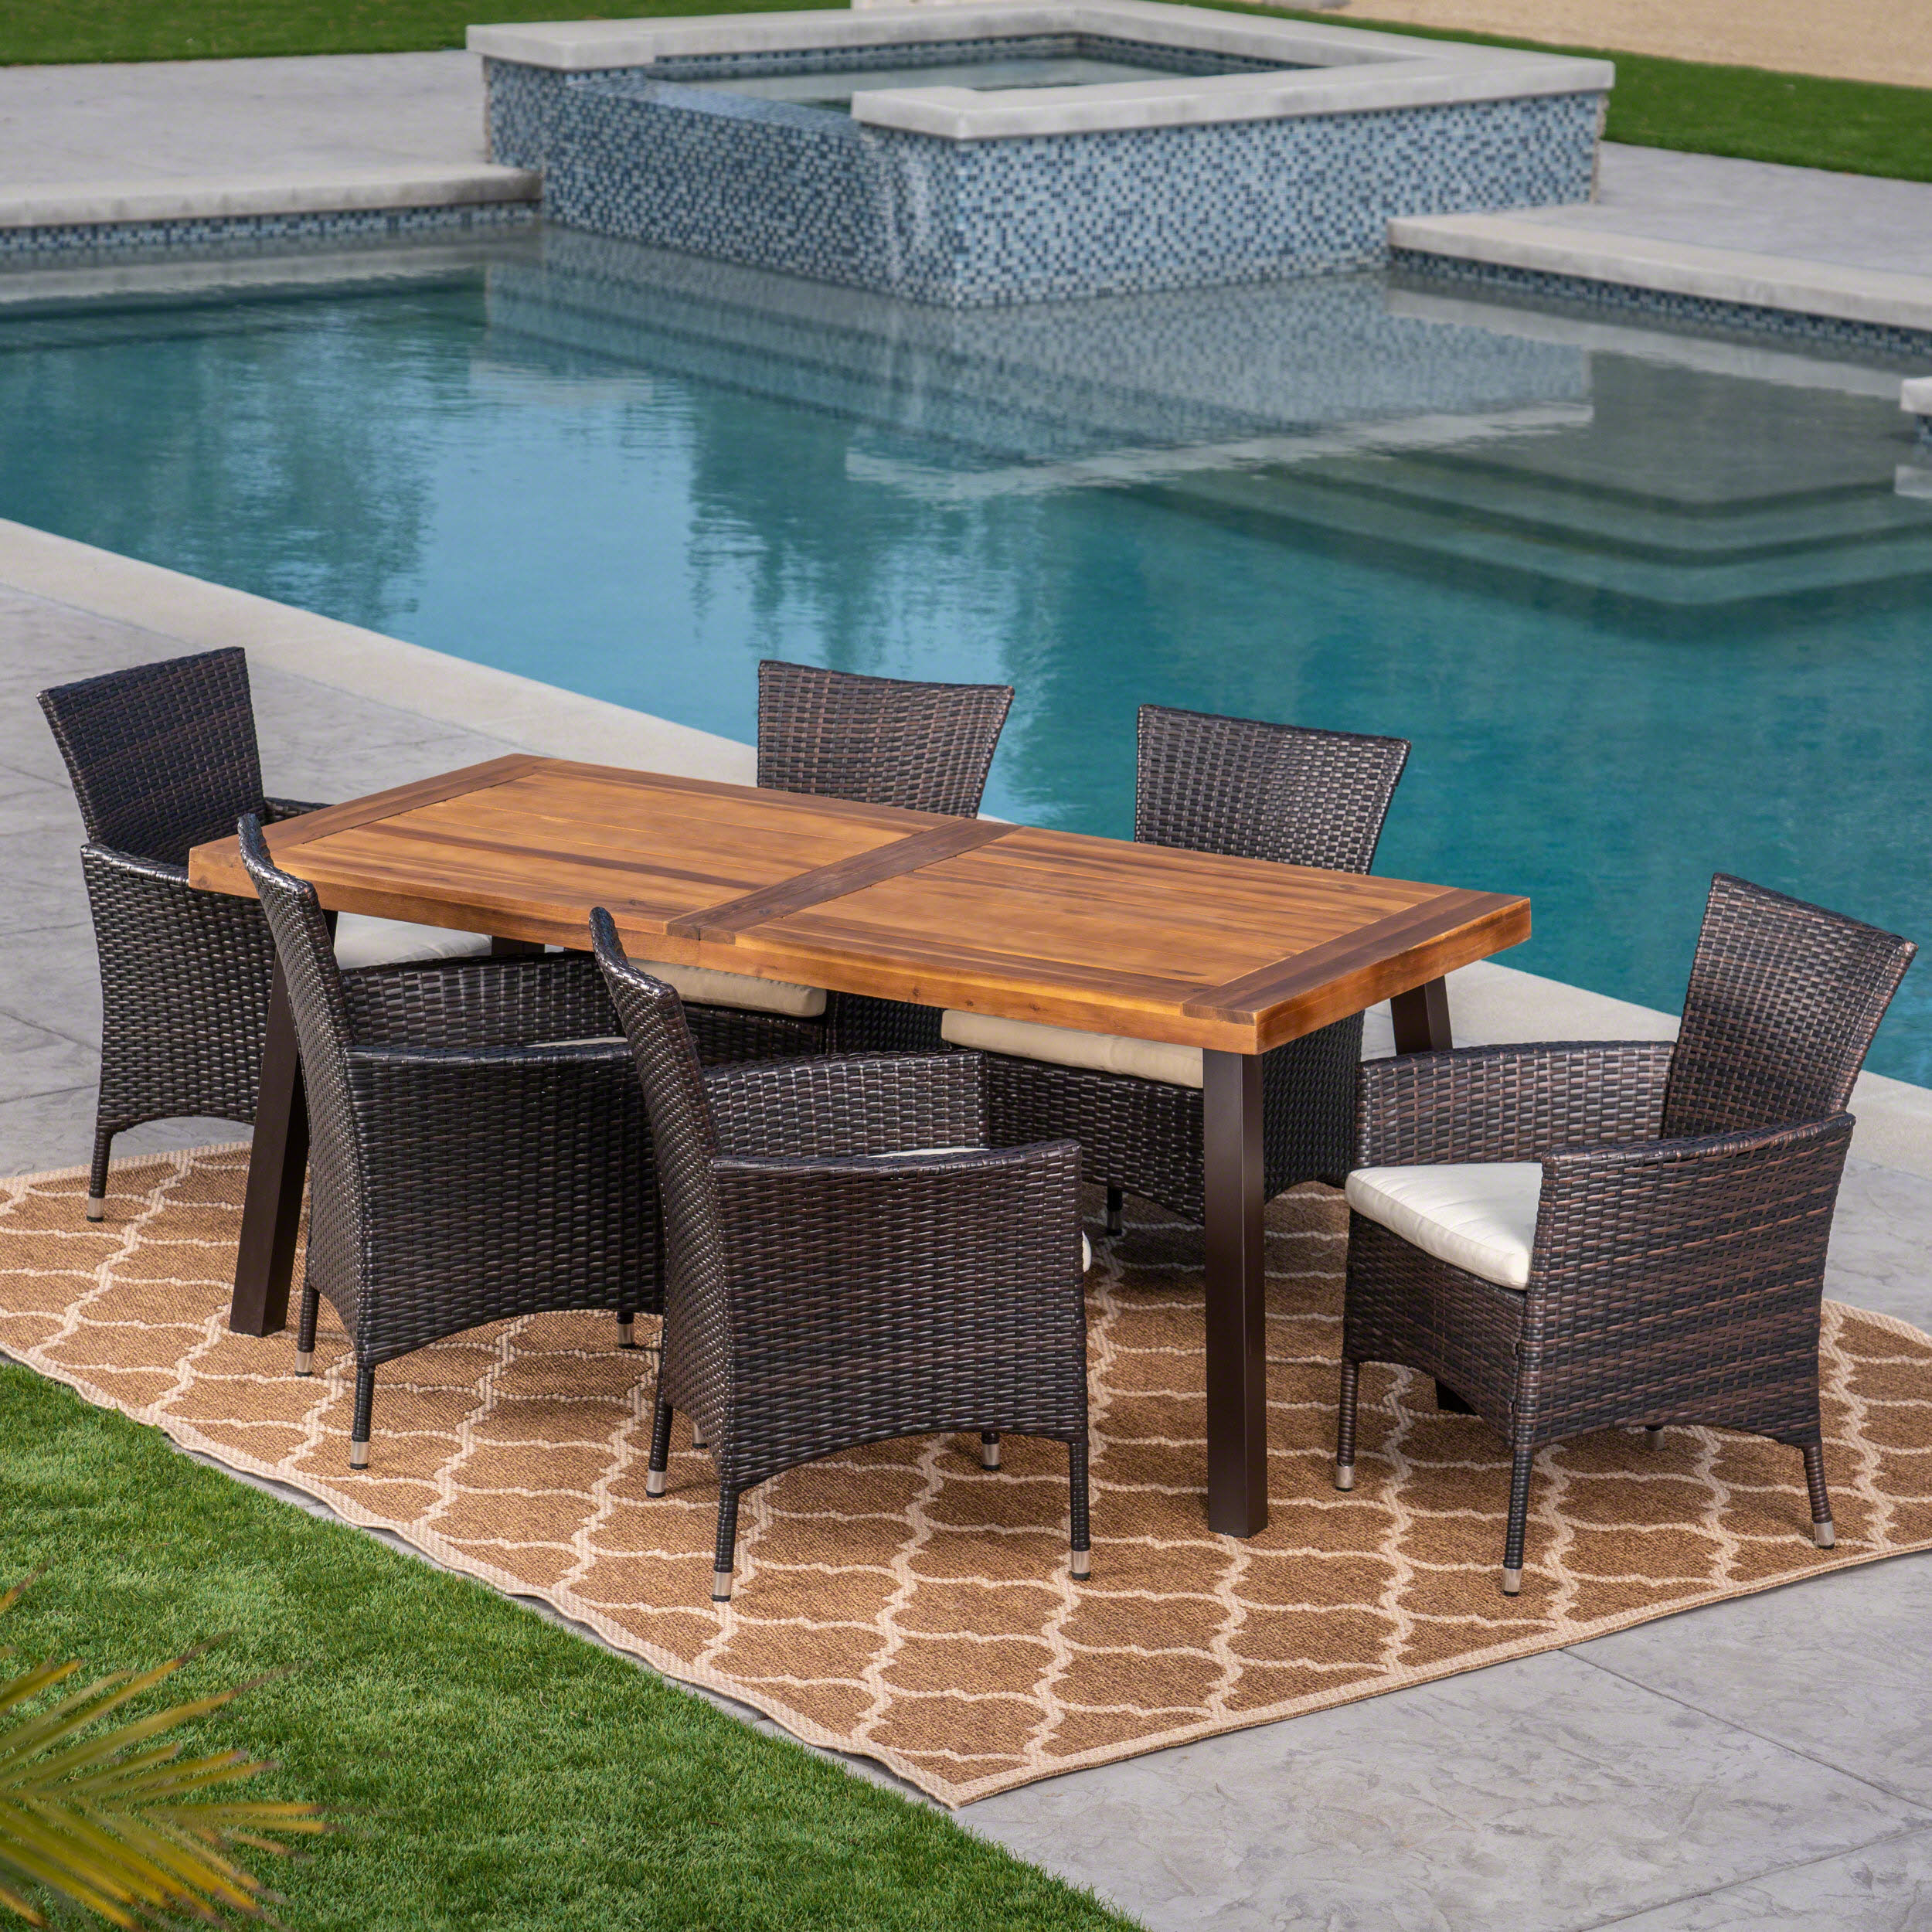 Outdoor 7 Piece Acacia Wood/Wicker Dining Set with Cushions, Multibrown, Beige, Teak - image 3 of 7